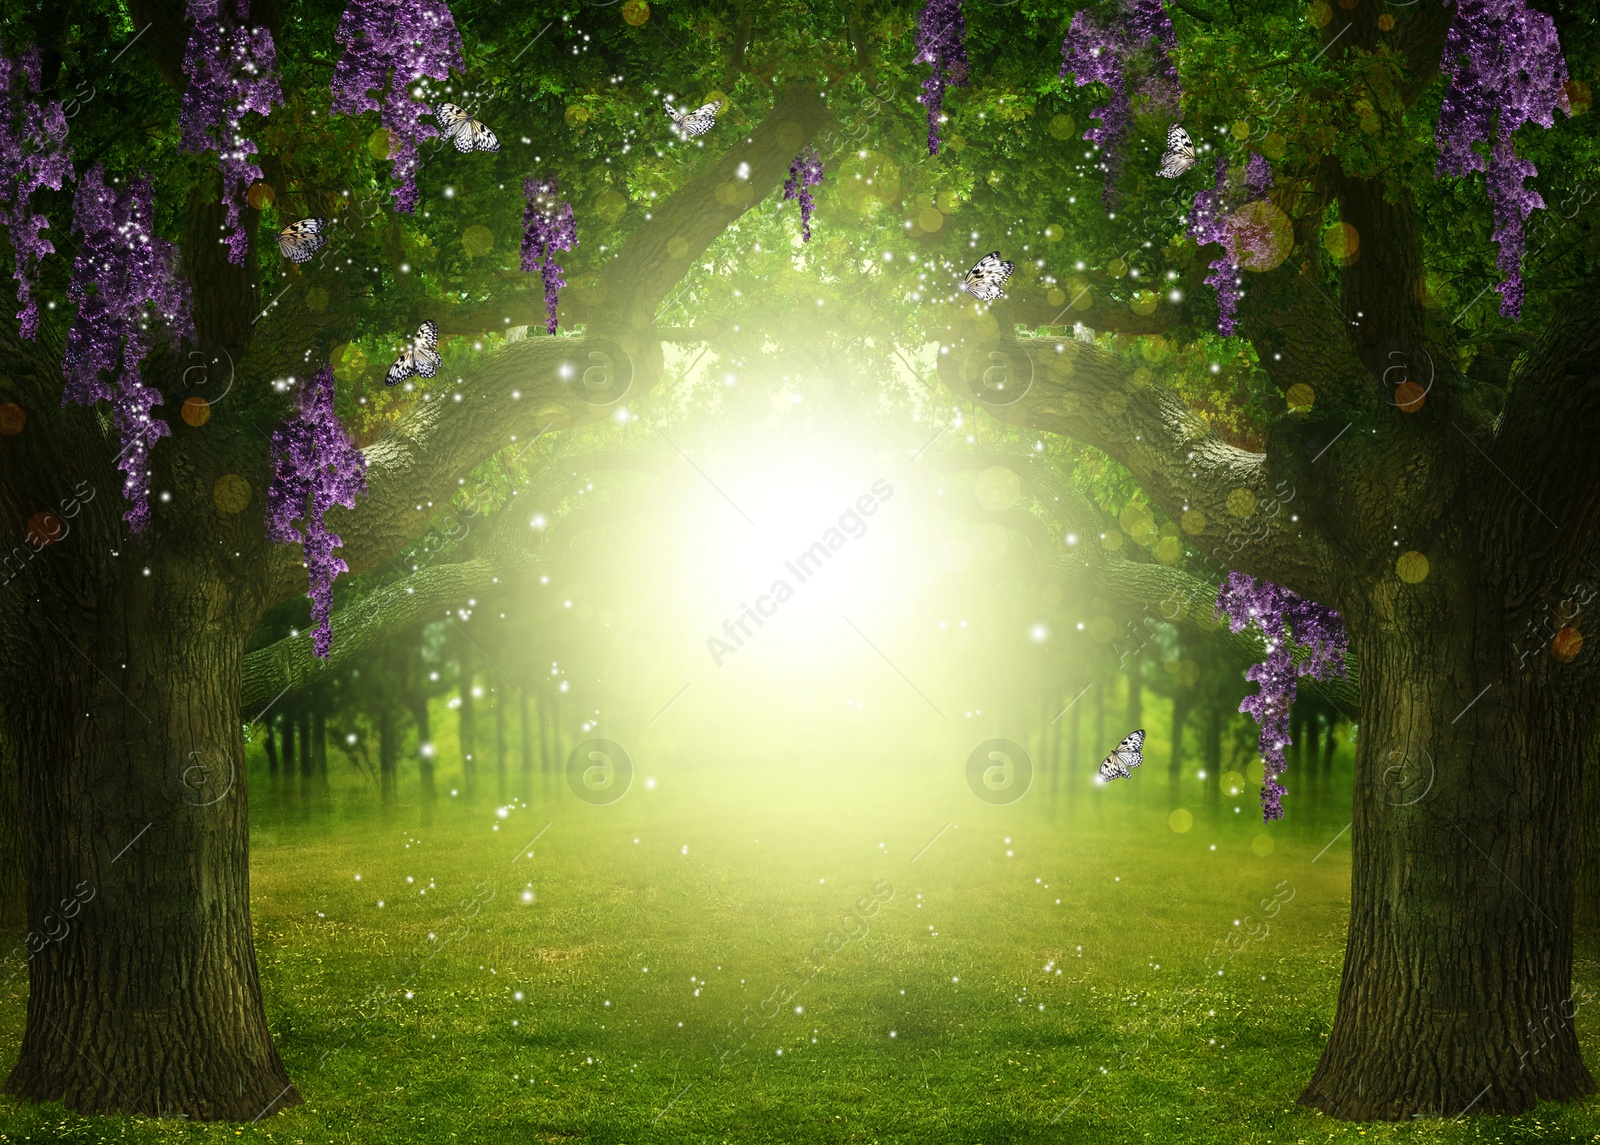 Image of Fantasy world. Enchanted forest with beautiful butterflies, magic lights and sunlit way between trees